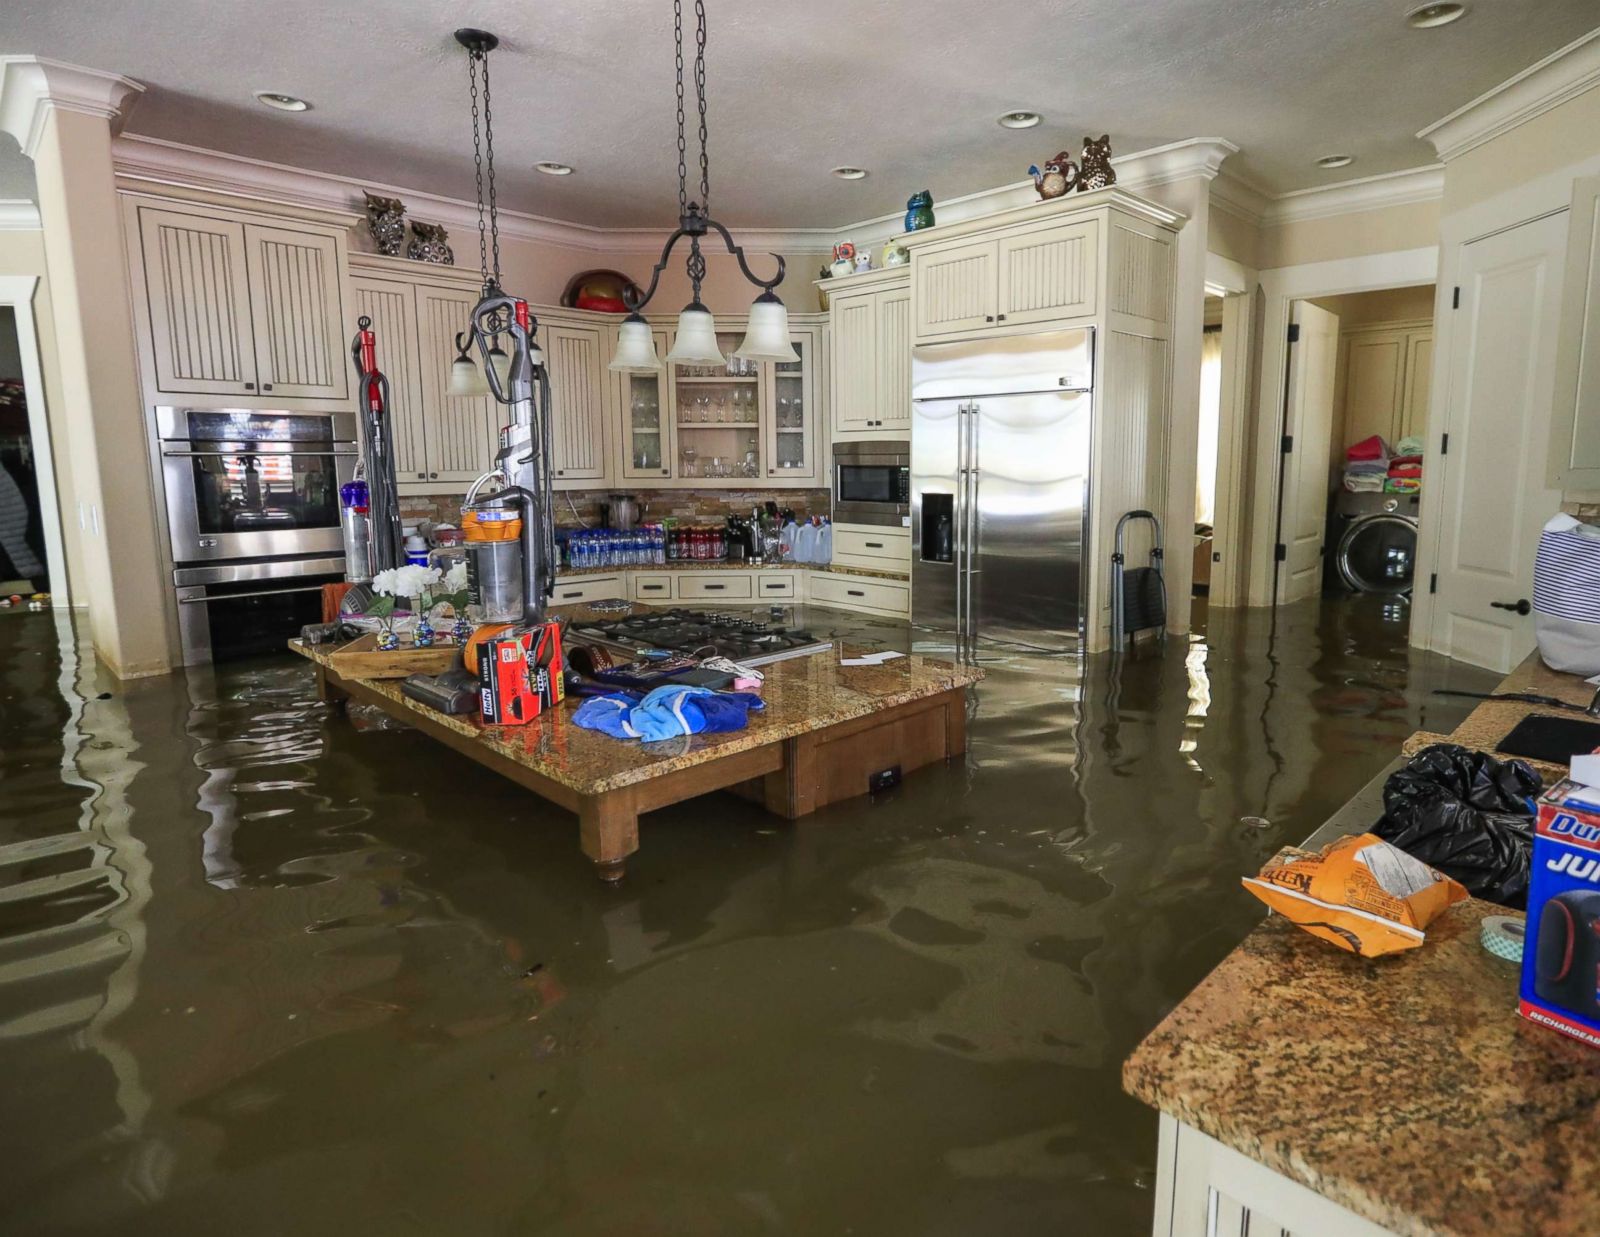 Picture | Gulf Coast residents struggle to recover after Hurricane Harvey - ABC News1600 x 1237